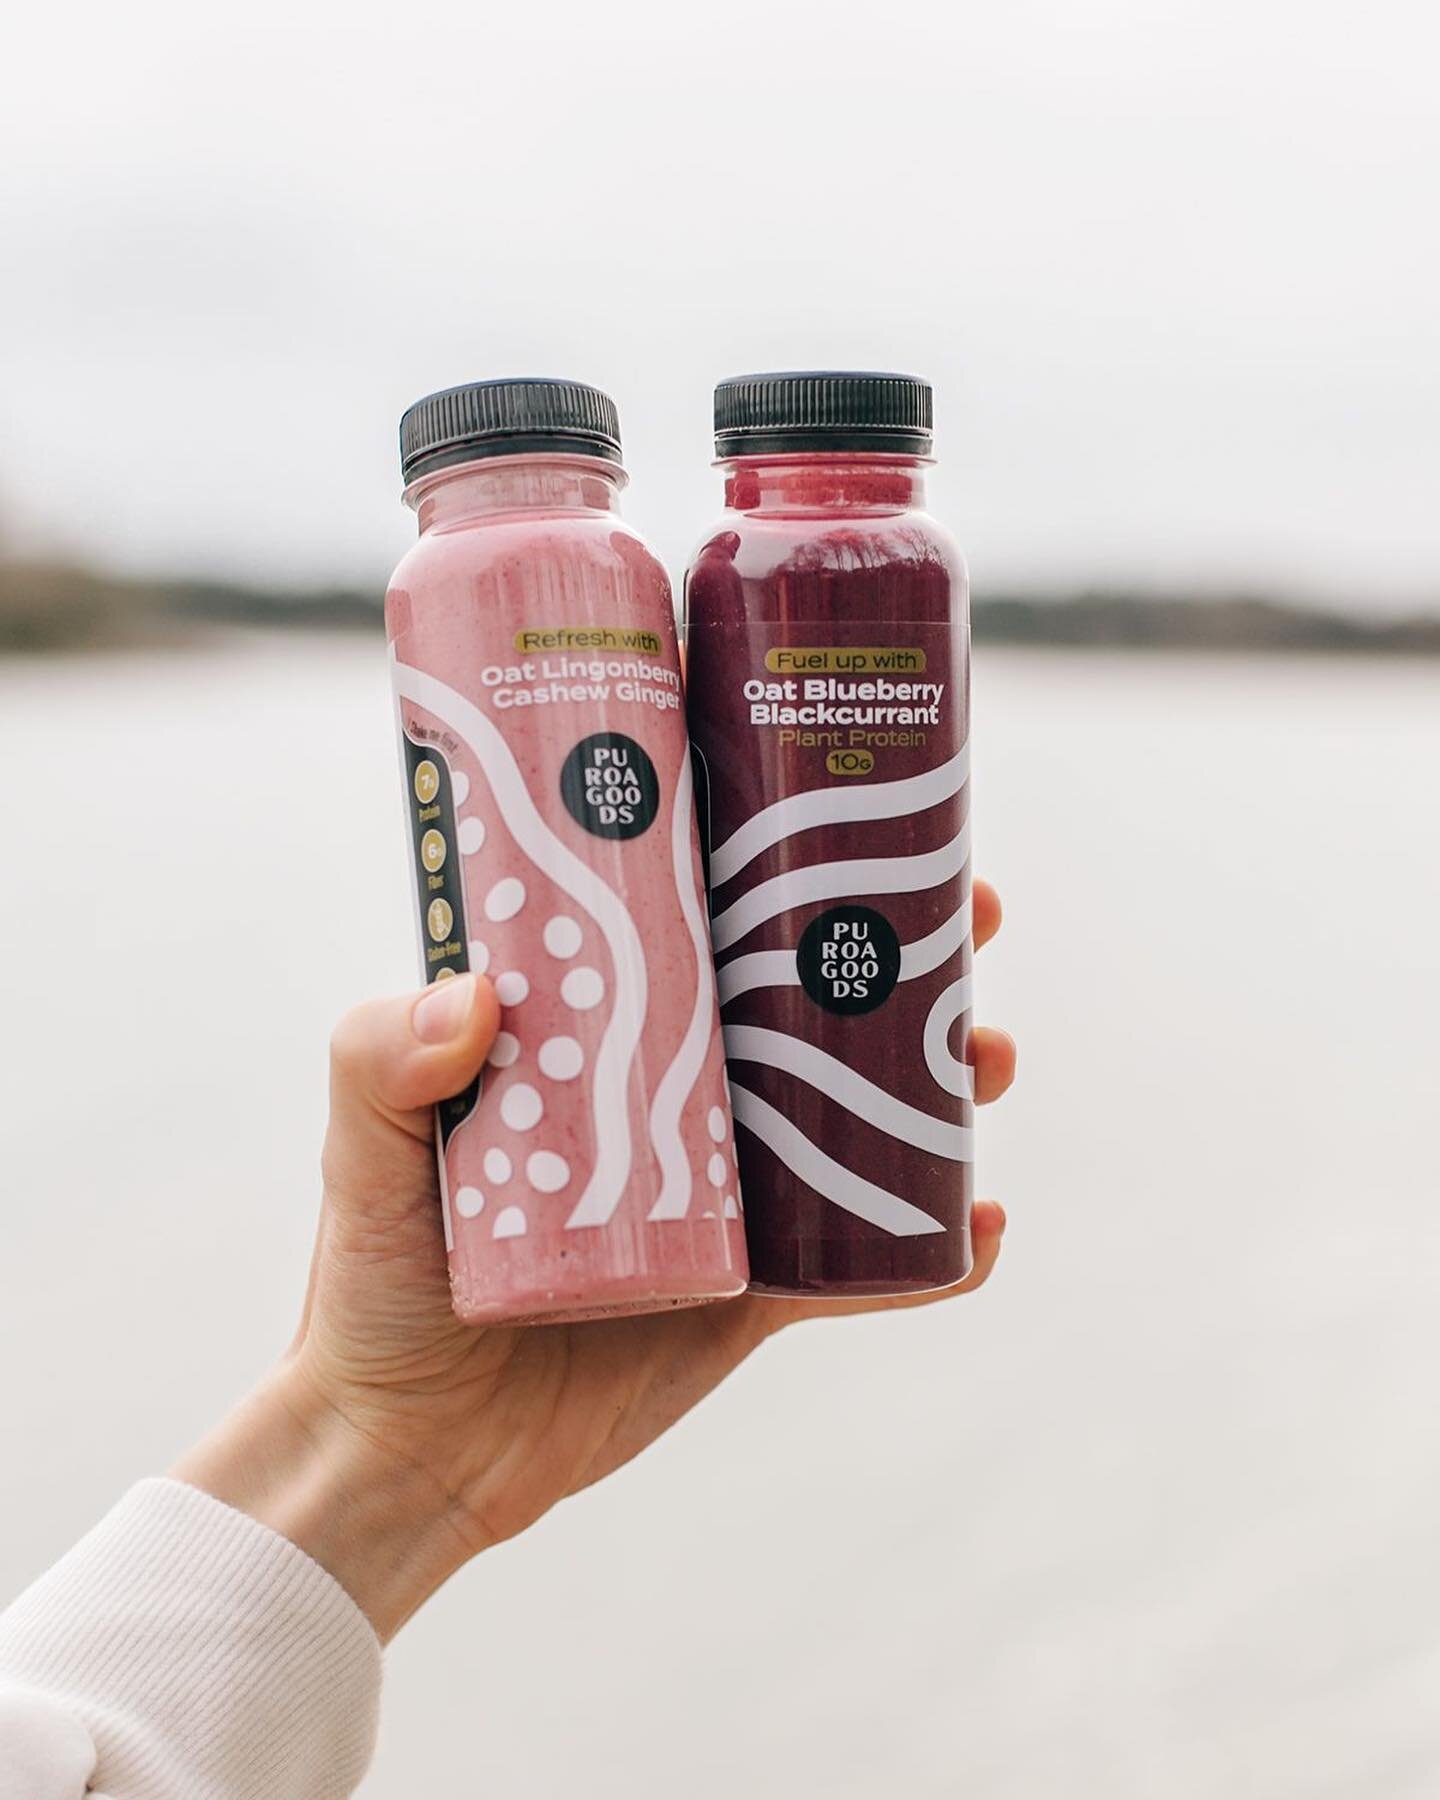 Smoothie is always a good idea. Have a tasty weekend!😋🥤

#empowersyou #smoothie #terveellinen #v&auml;lipala